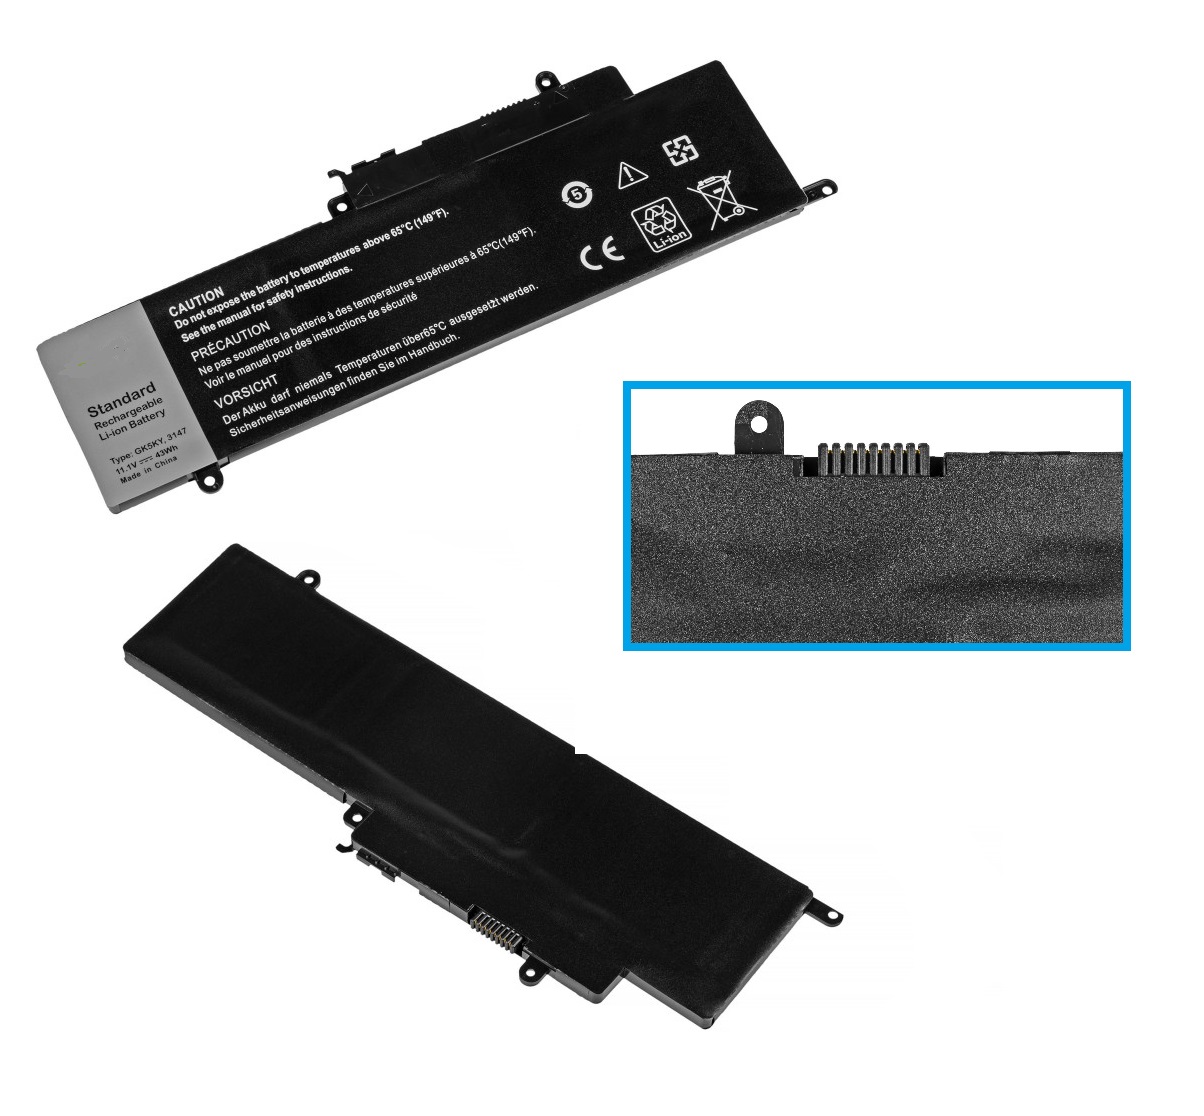 Dell Inspiron 3157 Laptop Battery